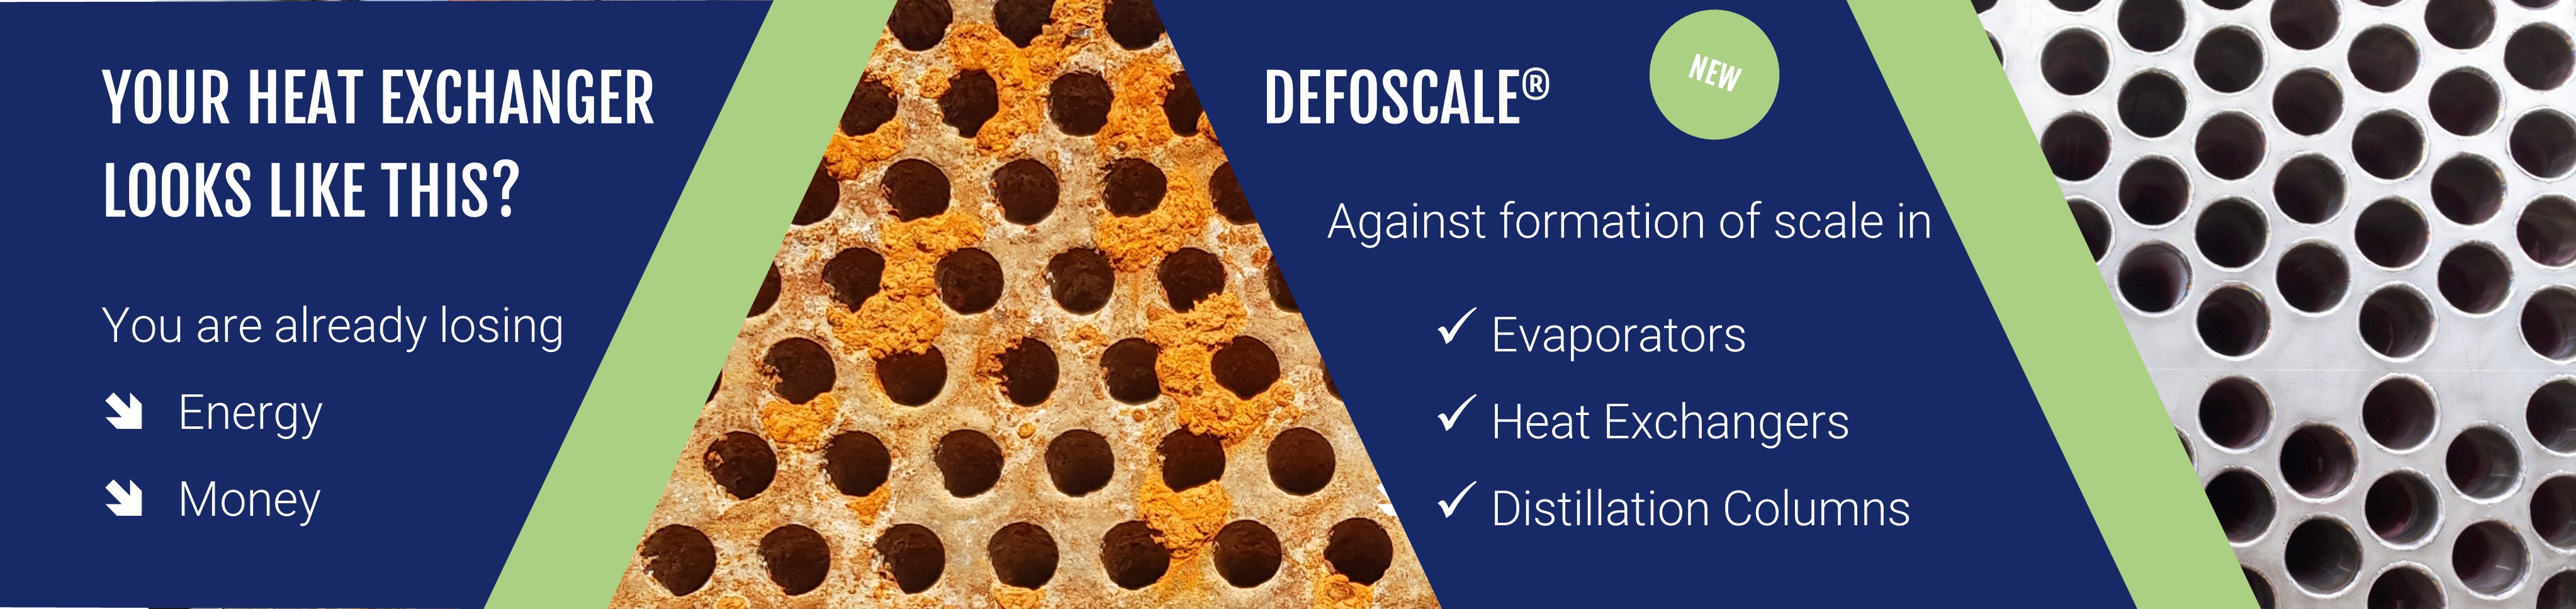 DEFOSCALE<sup>®</sup> - Effective against scaling